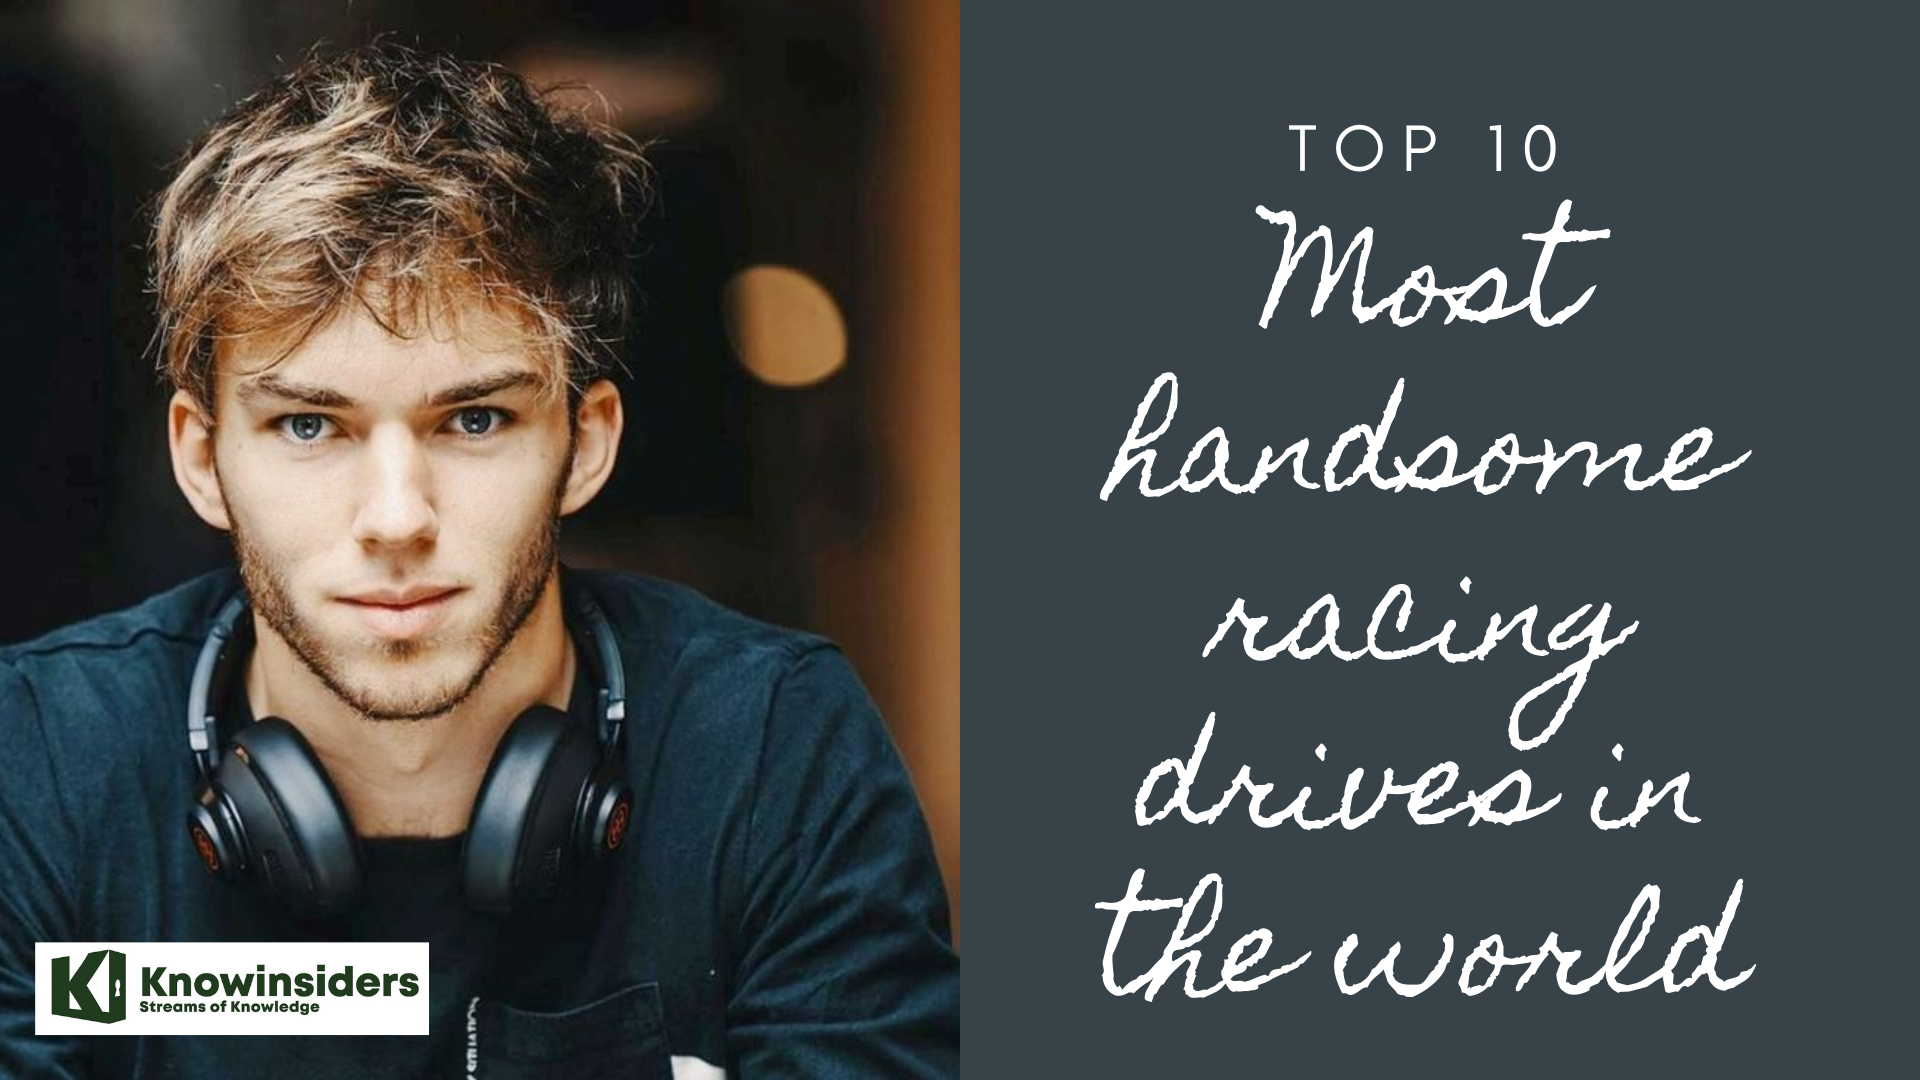 Top 10 Hottest and Handsome Racing Drivers In The World